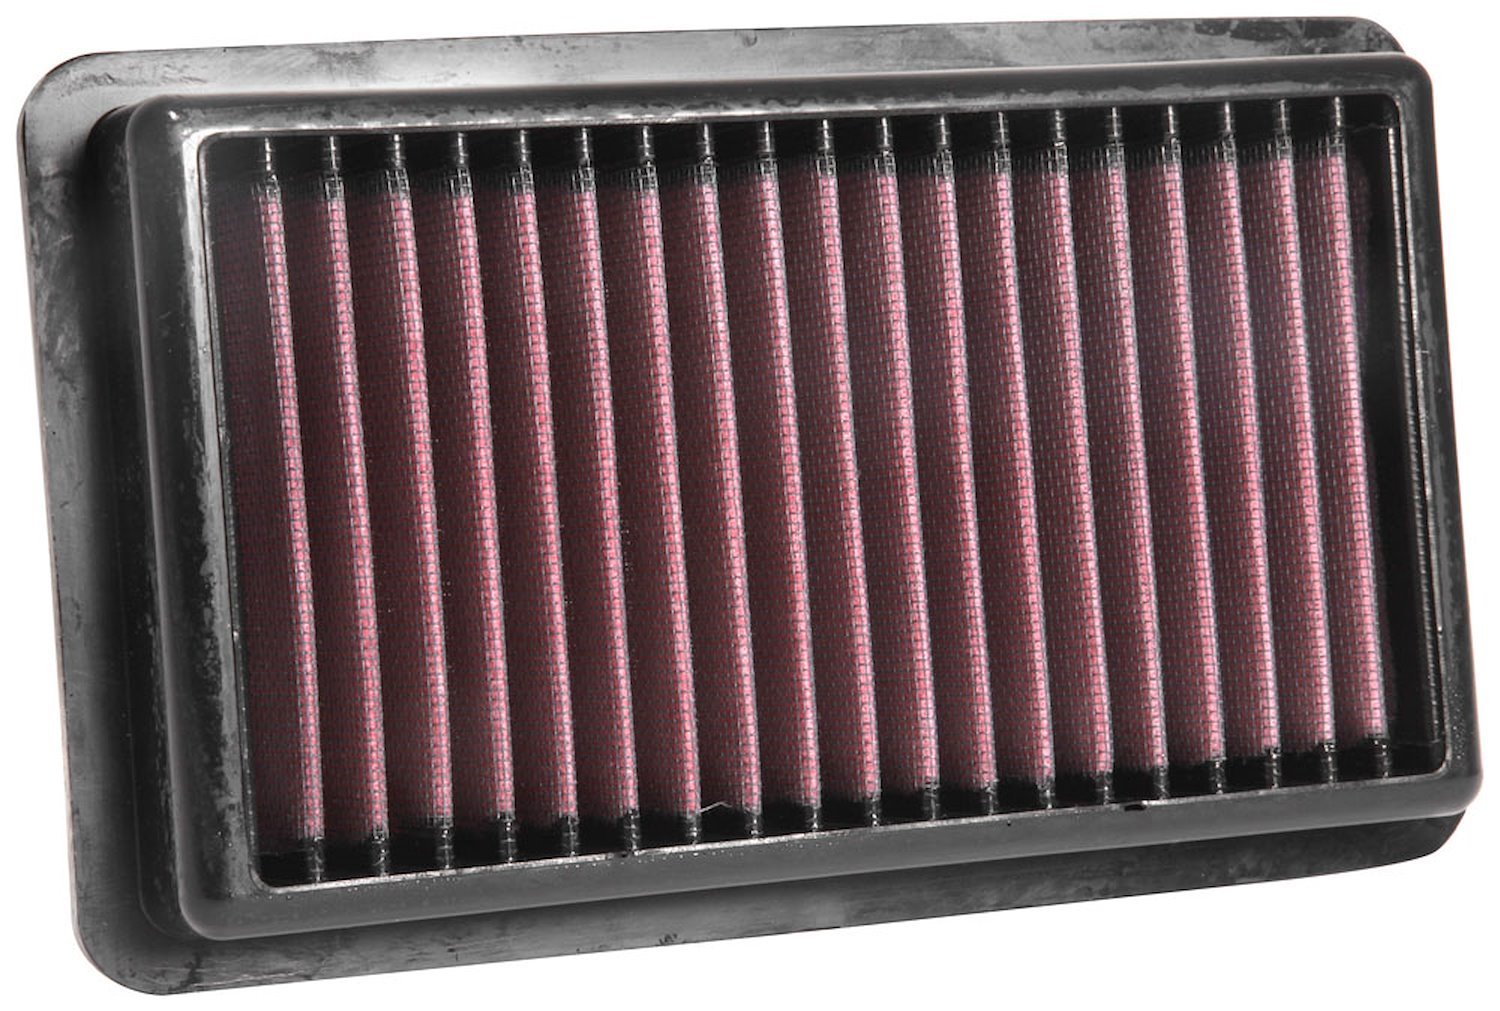 REPLACEMENT AIR FILTER